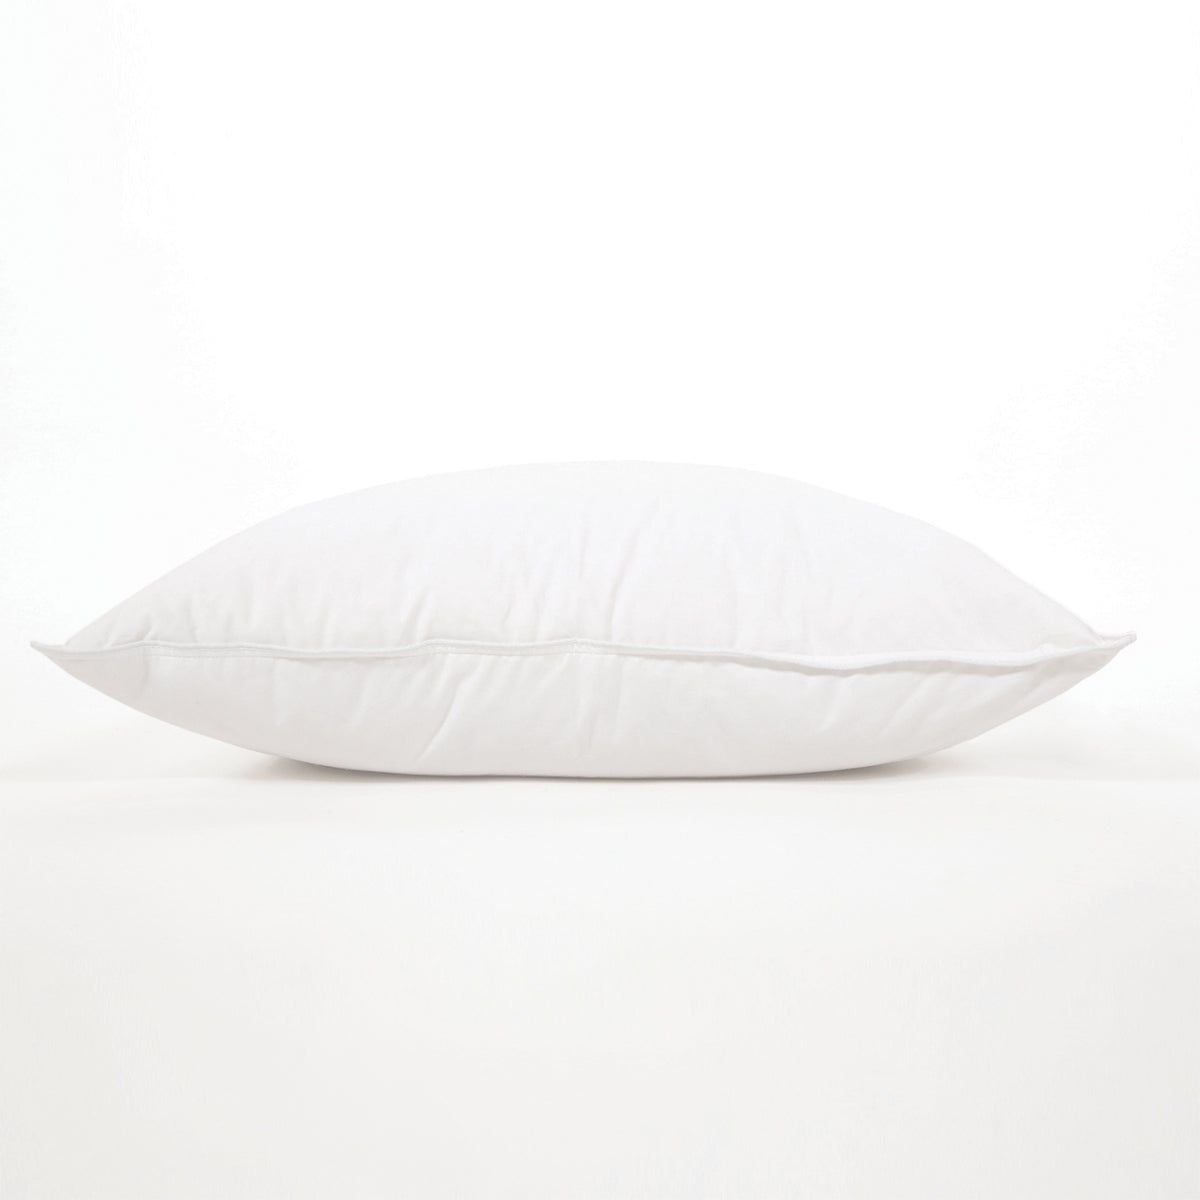 COMPARTMENT SLEEPING PILLOW INSERTS - Pom pom at Home 